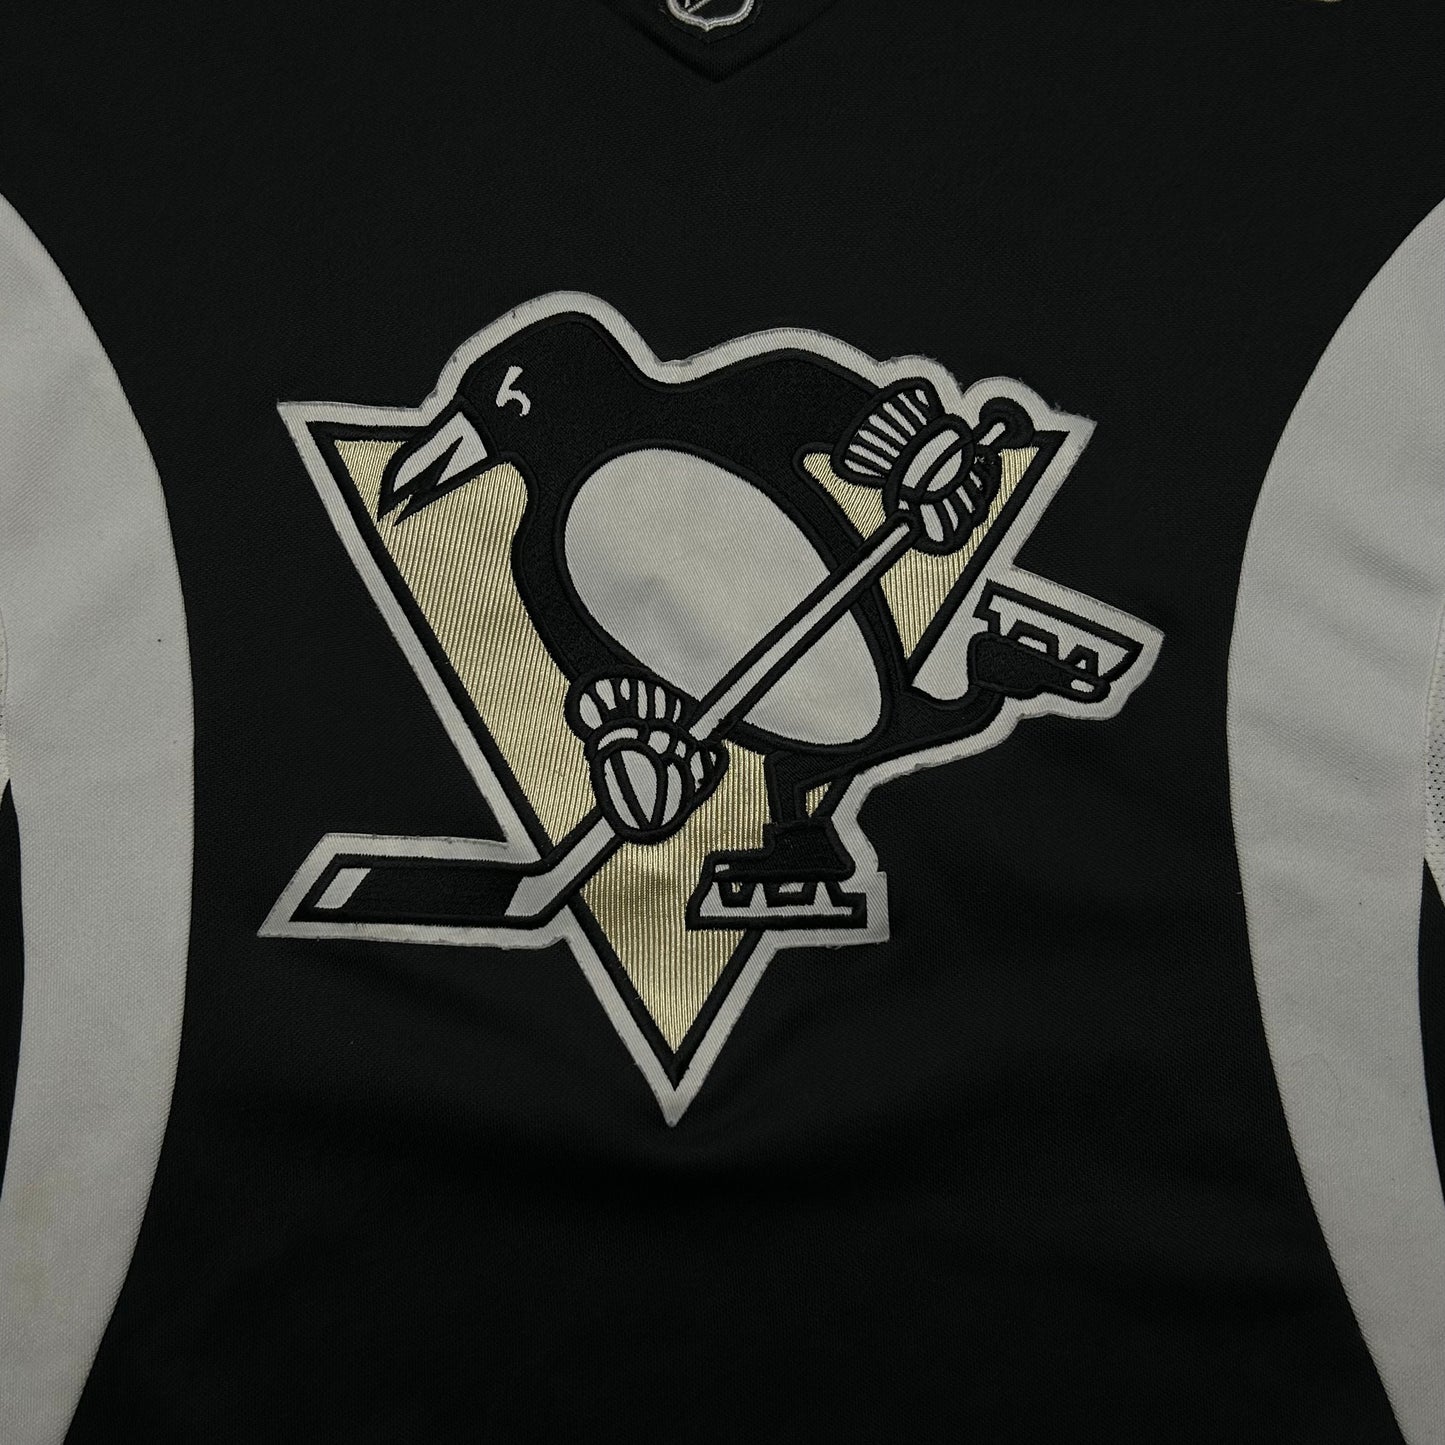 00s Pittsburg Penguins Jersey (L)